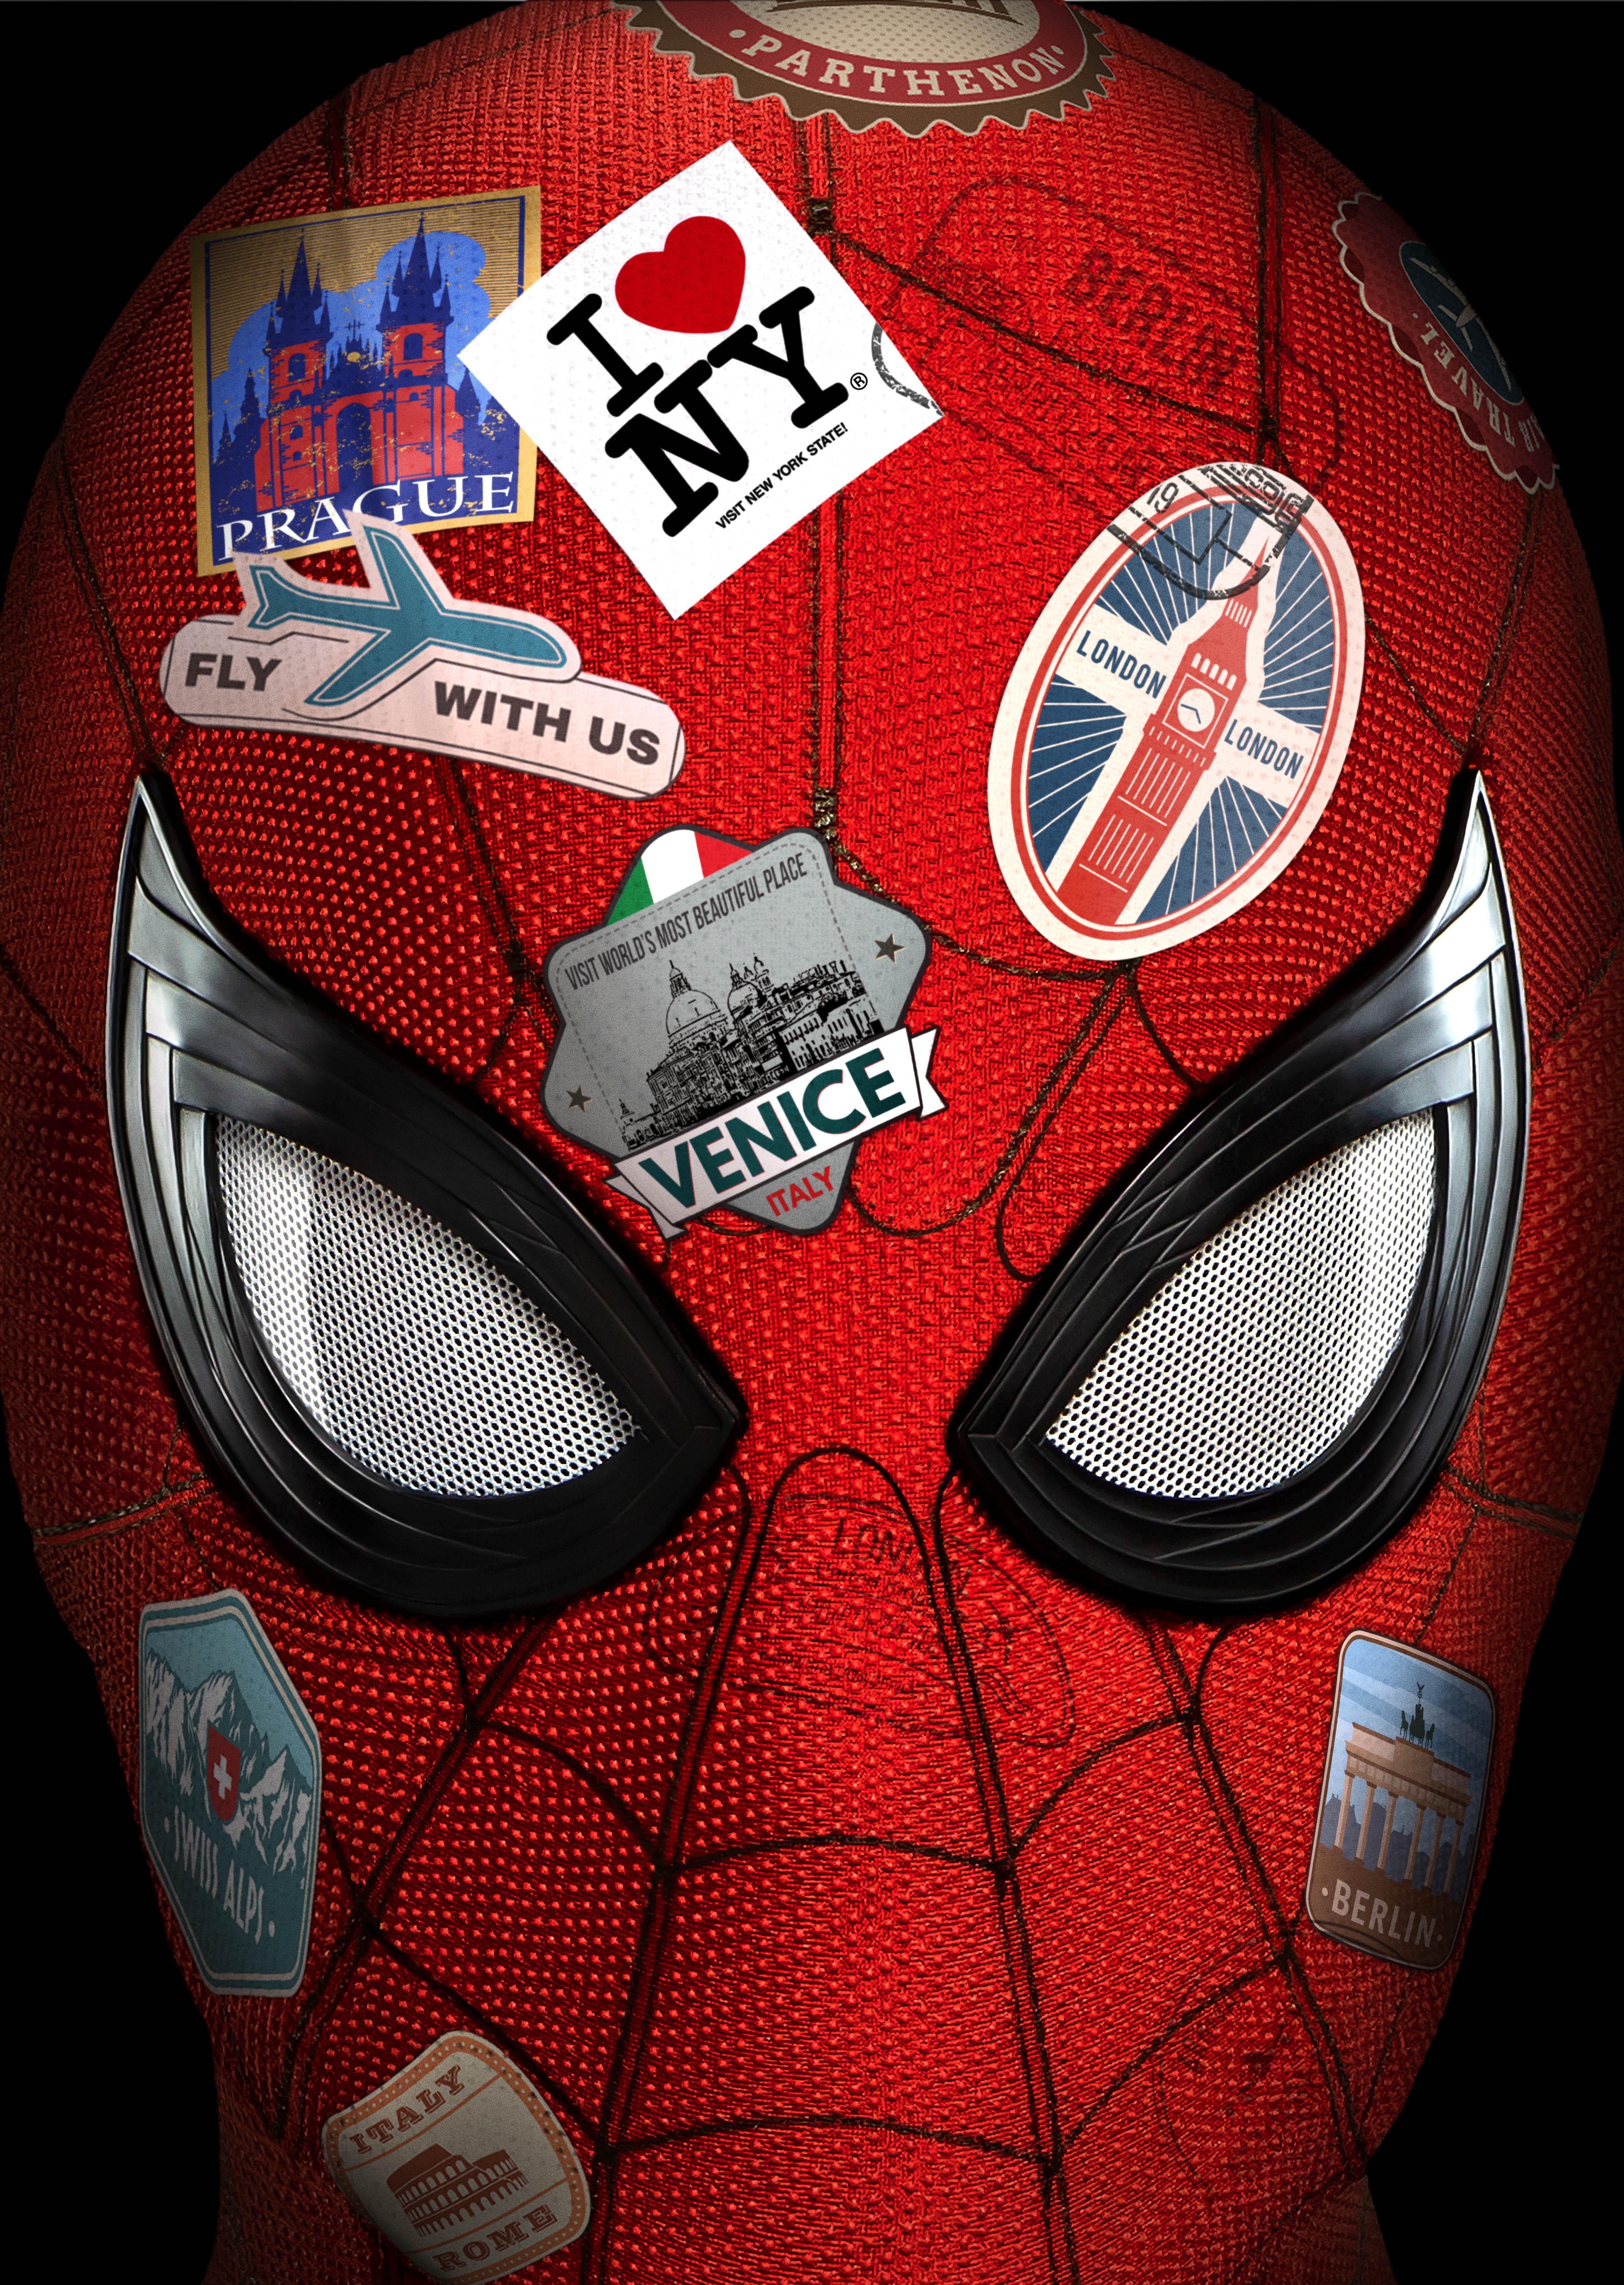 spider man far from home wallpaper pc